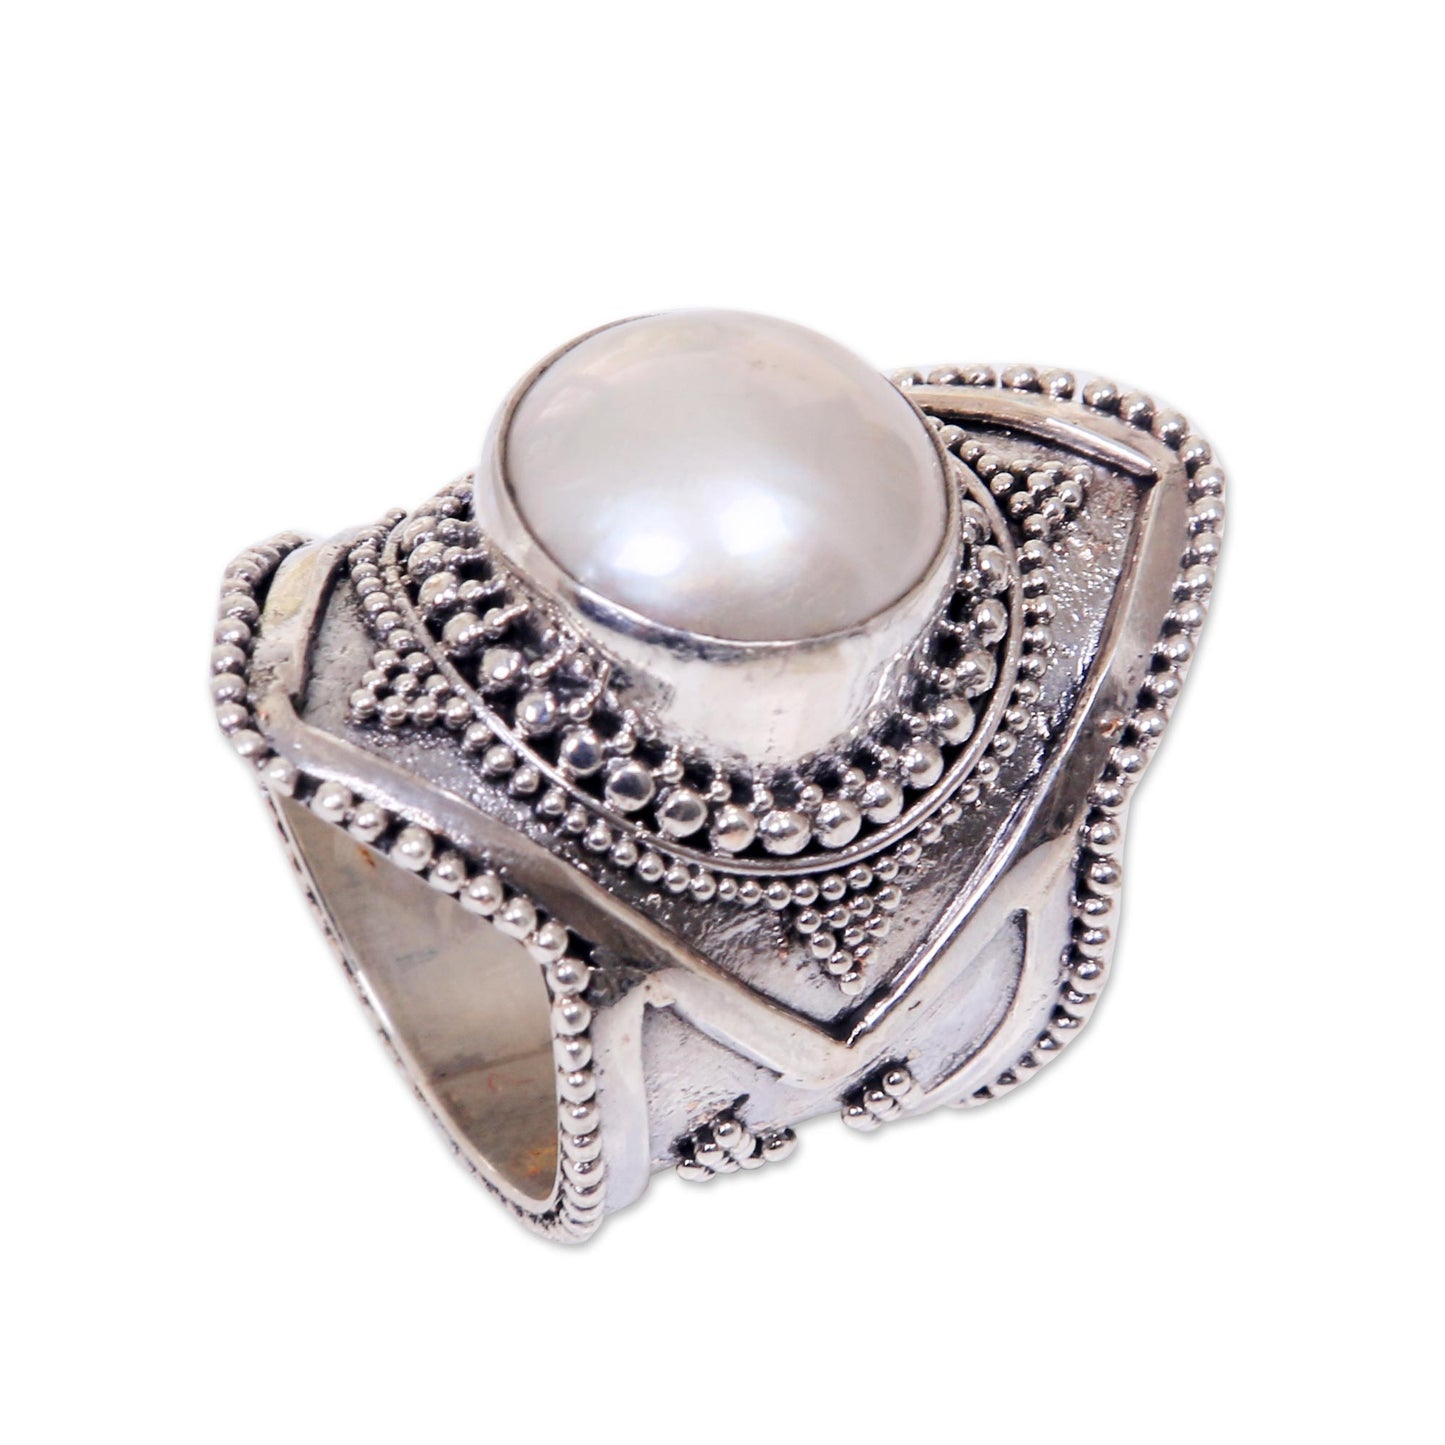 Cotton Flower Cultured Mabe Pearl Cocktail Ring from Indonesia